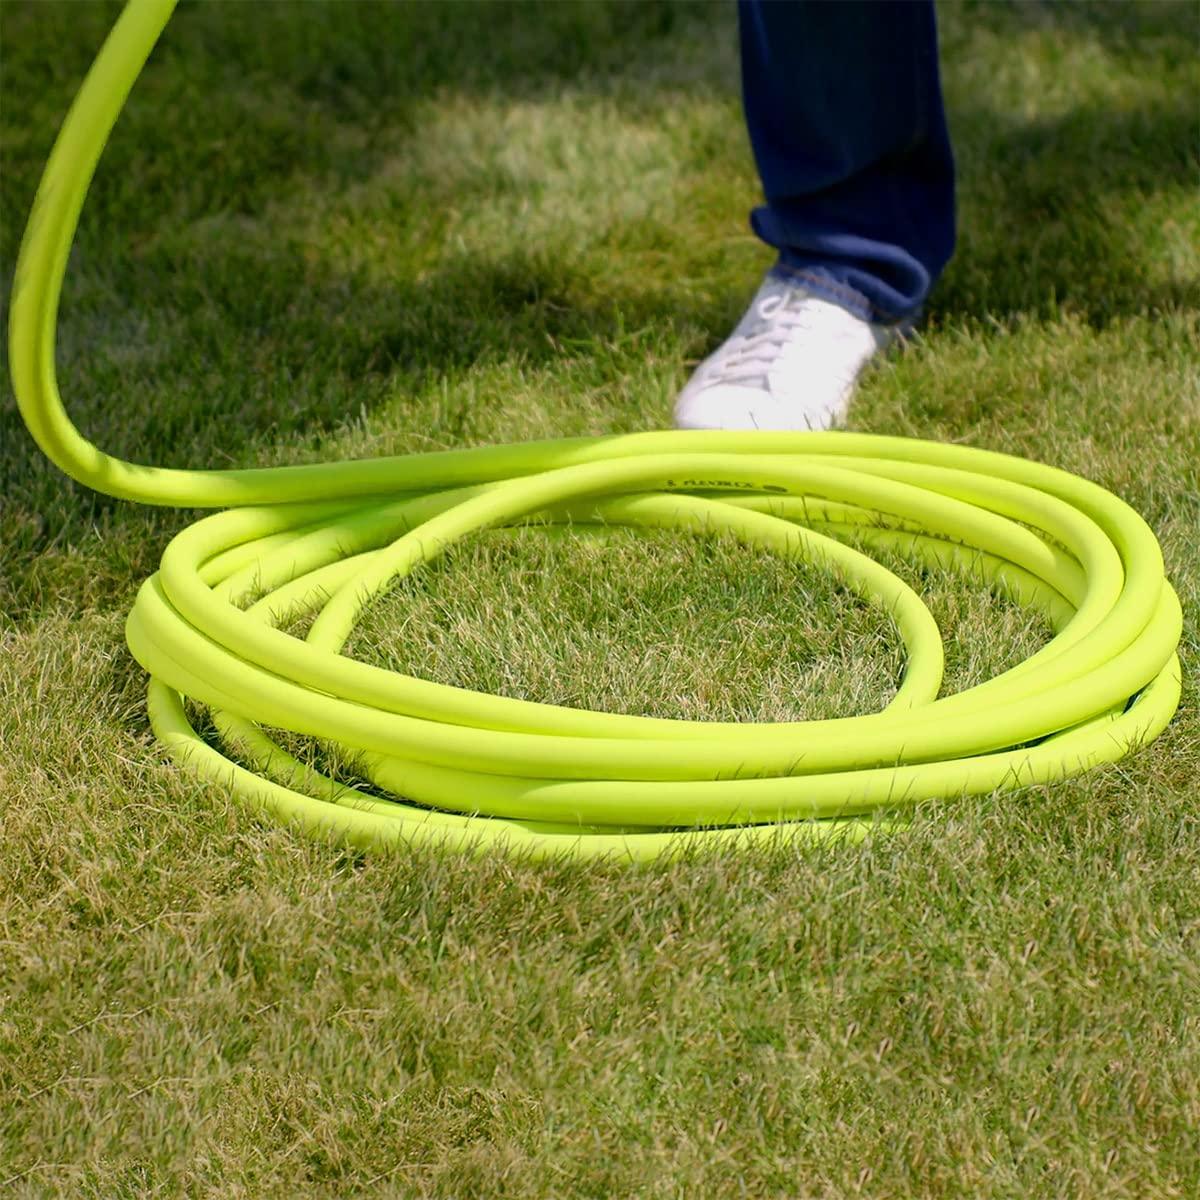 LazyFlex™ Garden Hose 5/8 in. x 75 ft., Heavy Duty, Lightweight, Drinking Water Safe, Salad Color, Pro Connectors - Lazy Pro